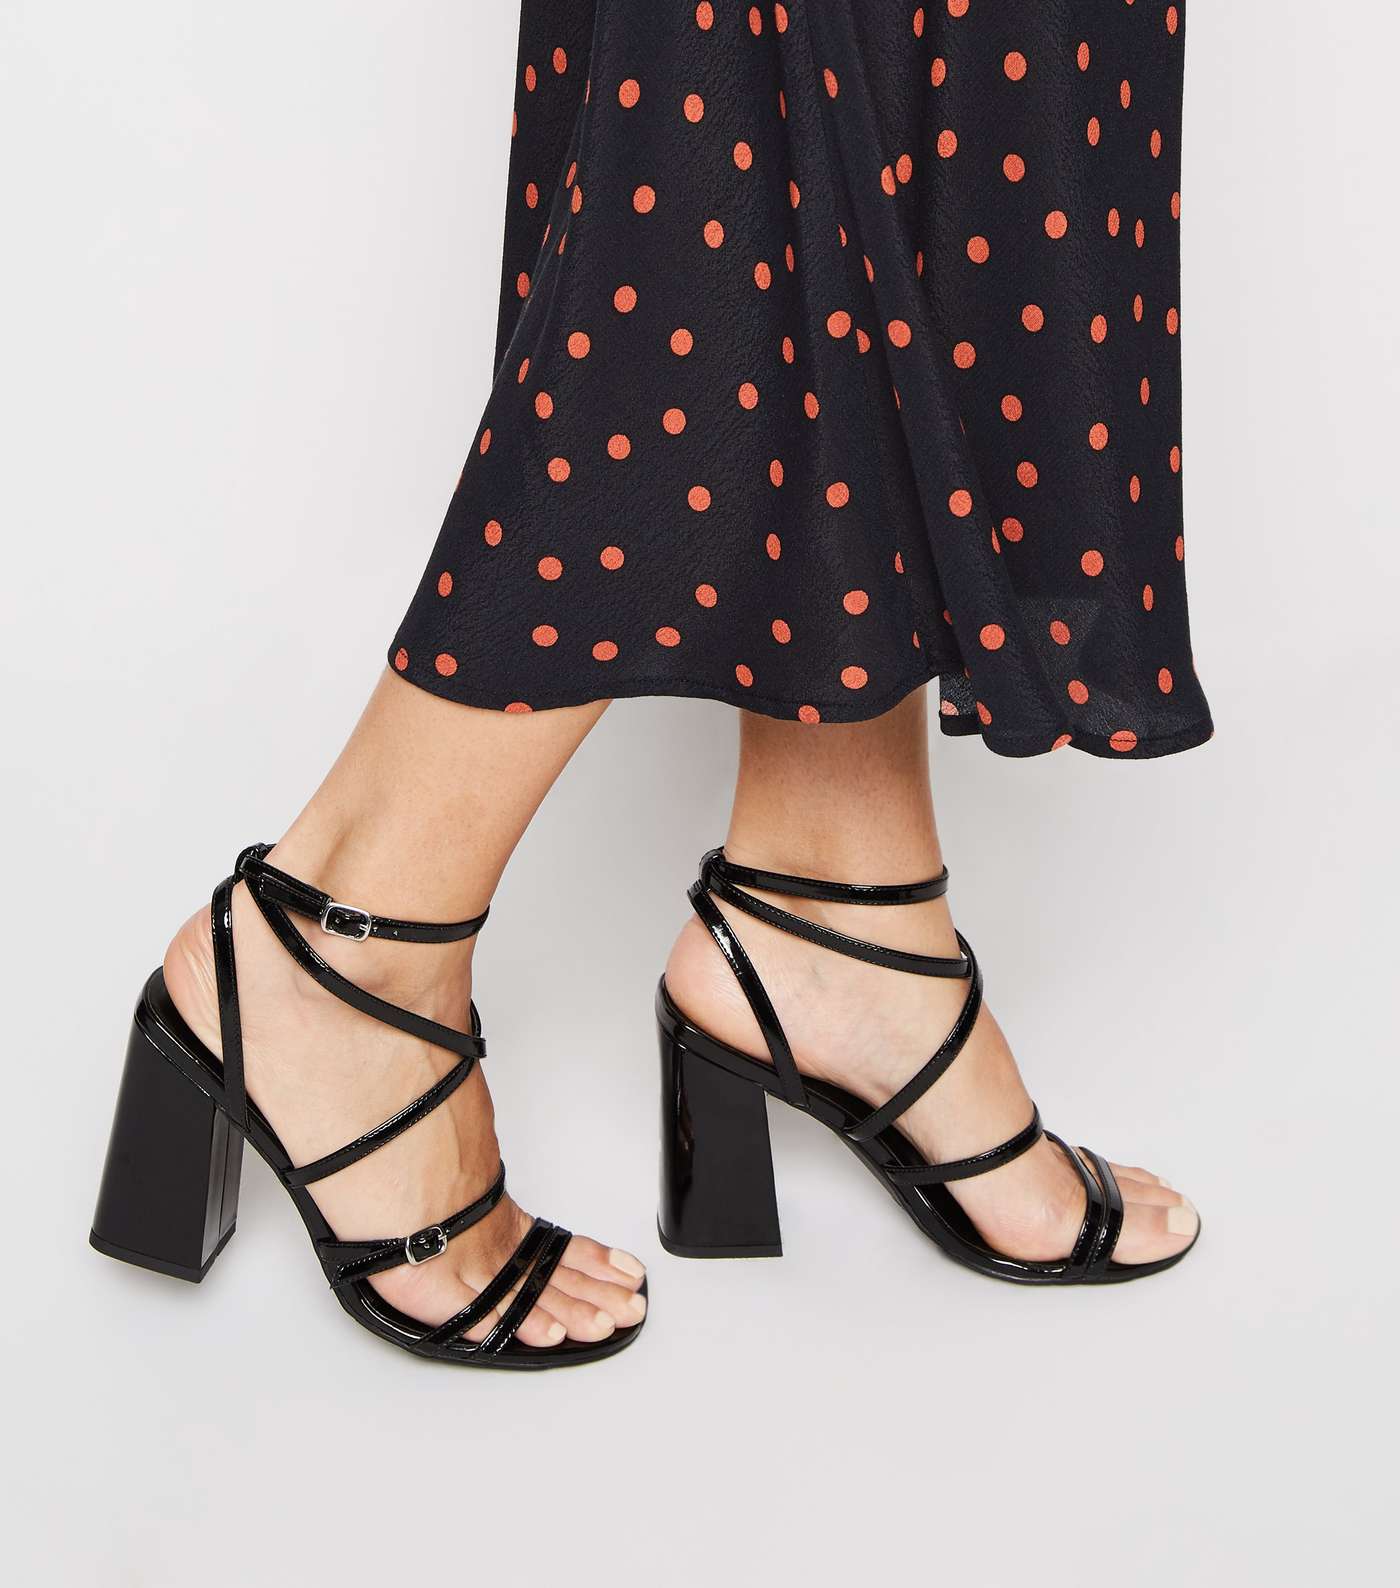 Black Patent Strappy Flared Block Heels Image 2